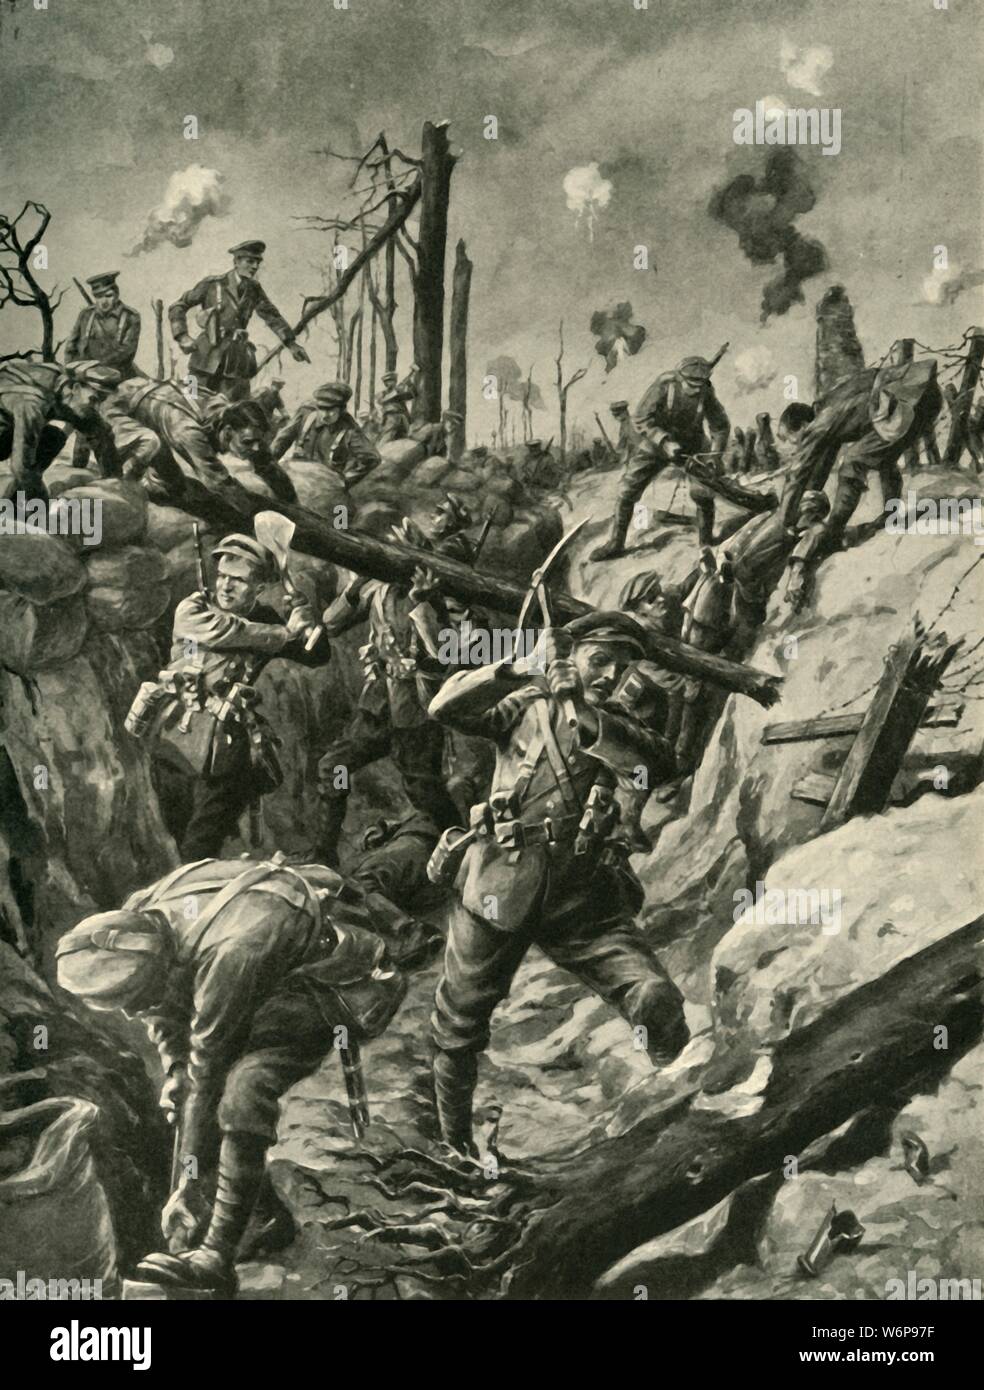 British soldiers in a German trench, Western Front, First World War, c1915, (c1920). 'Consolidating a captured German Trench after the Great Attack: British infantry at work near Hulluch' (in northern France). Drawn 'from the description of a wounded soldier'. From &quot;The Great World War - A History&quot; Volume IV, edited by Frank A Mumby. [The Gresham Publishing Company Ltd, London, c1920] Stock Photo